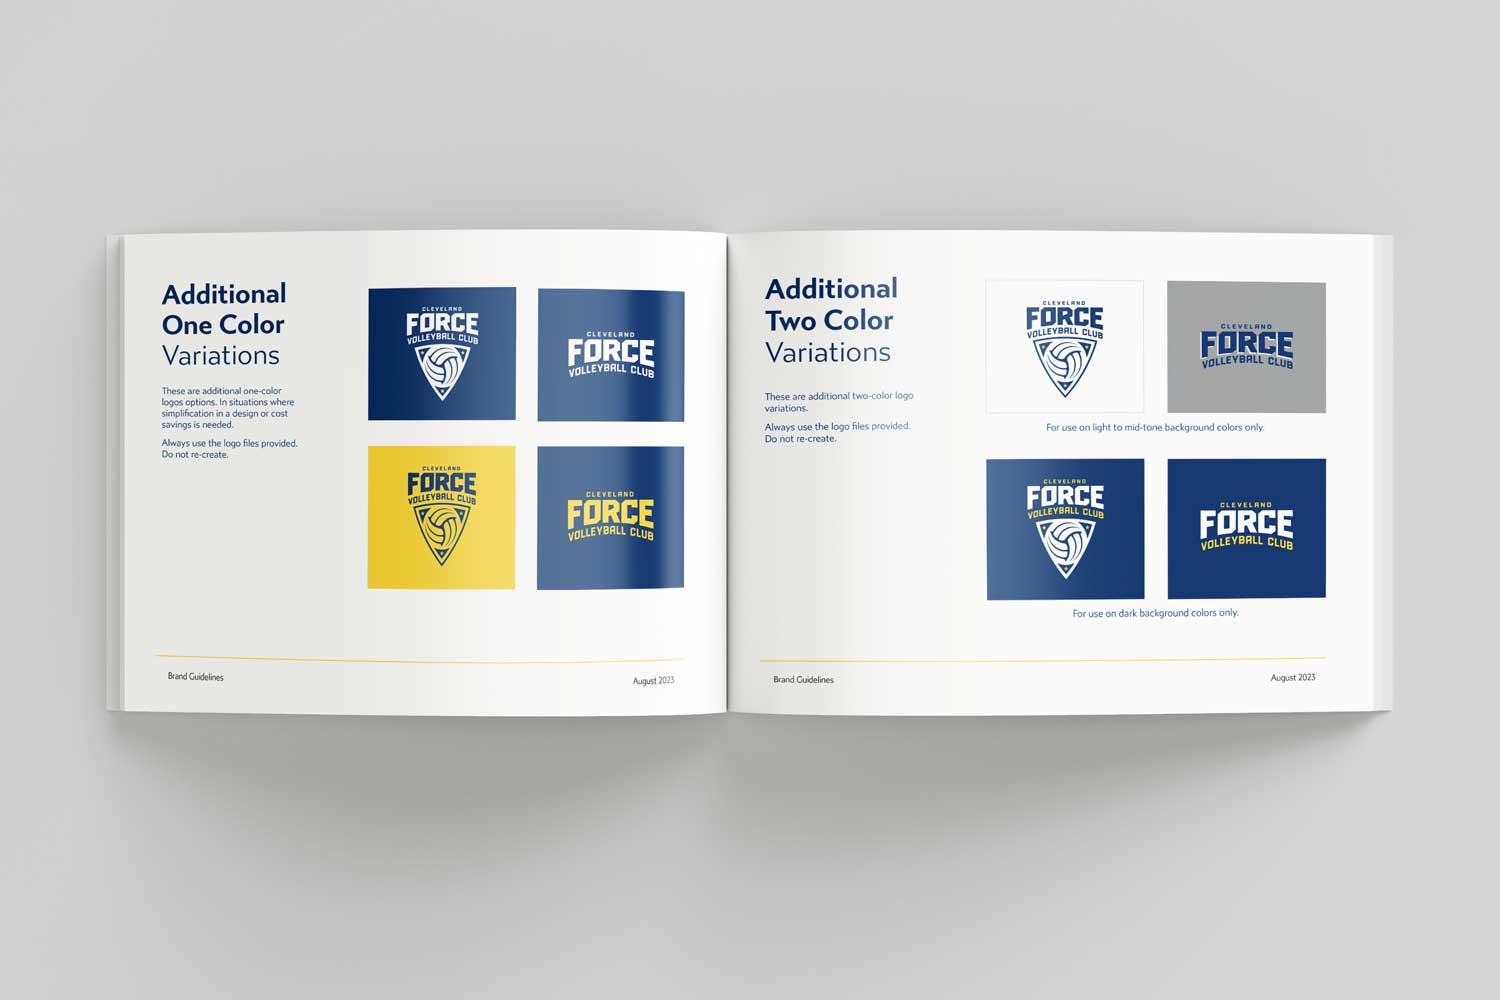 The brand guidelines Acclaim created for Cleveland Force Soccer.